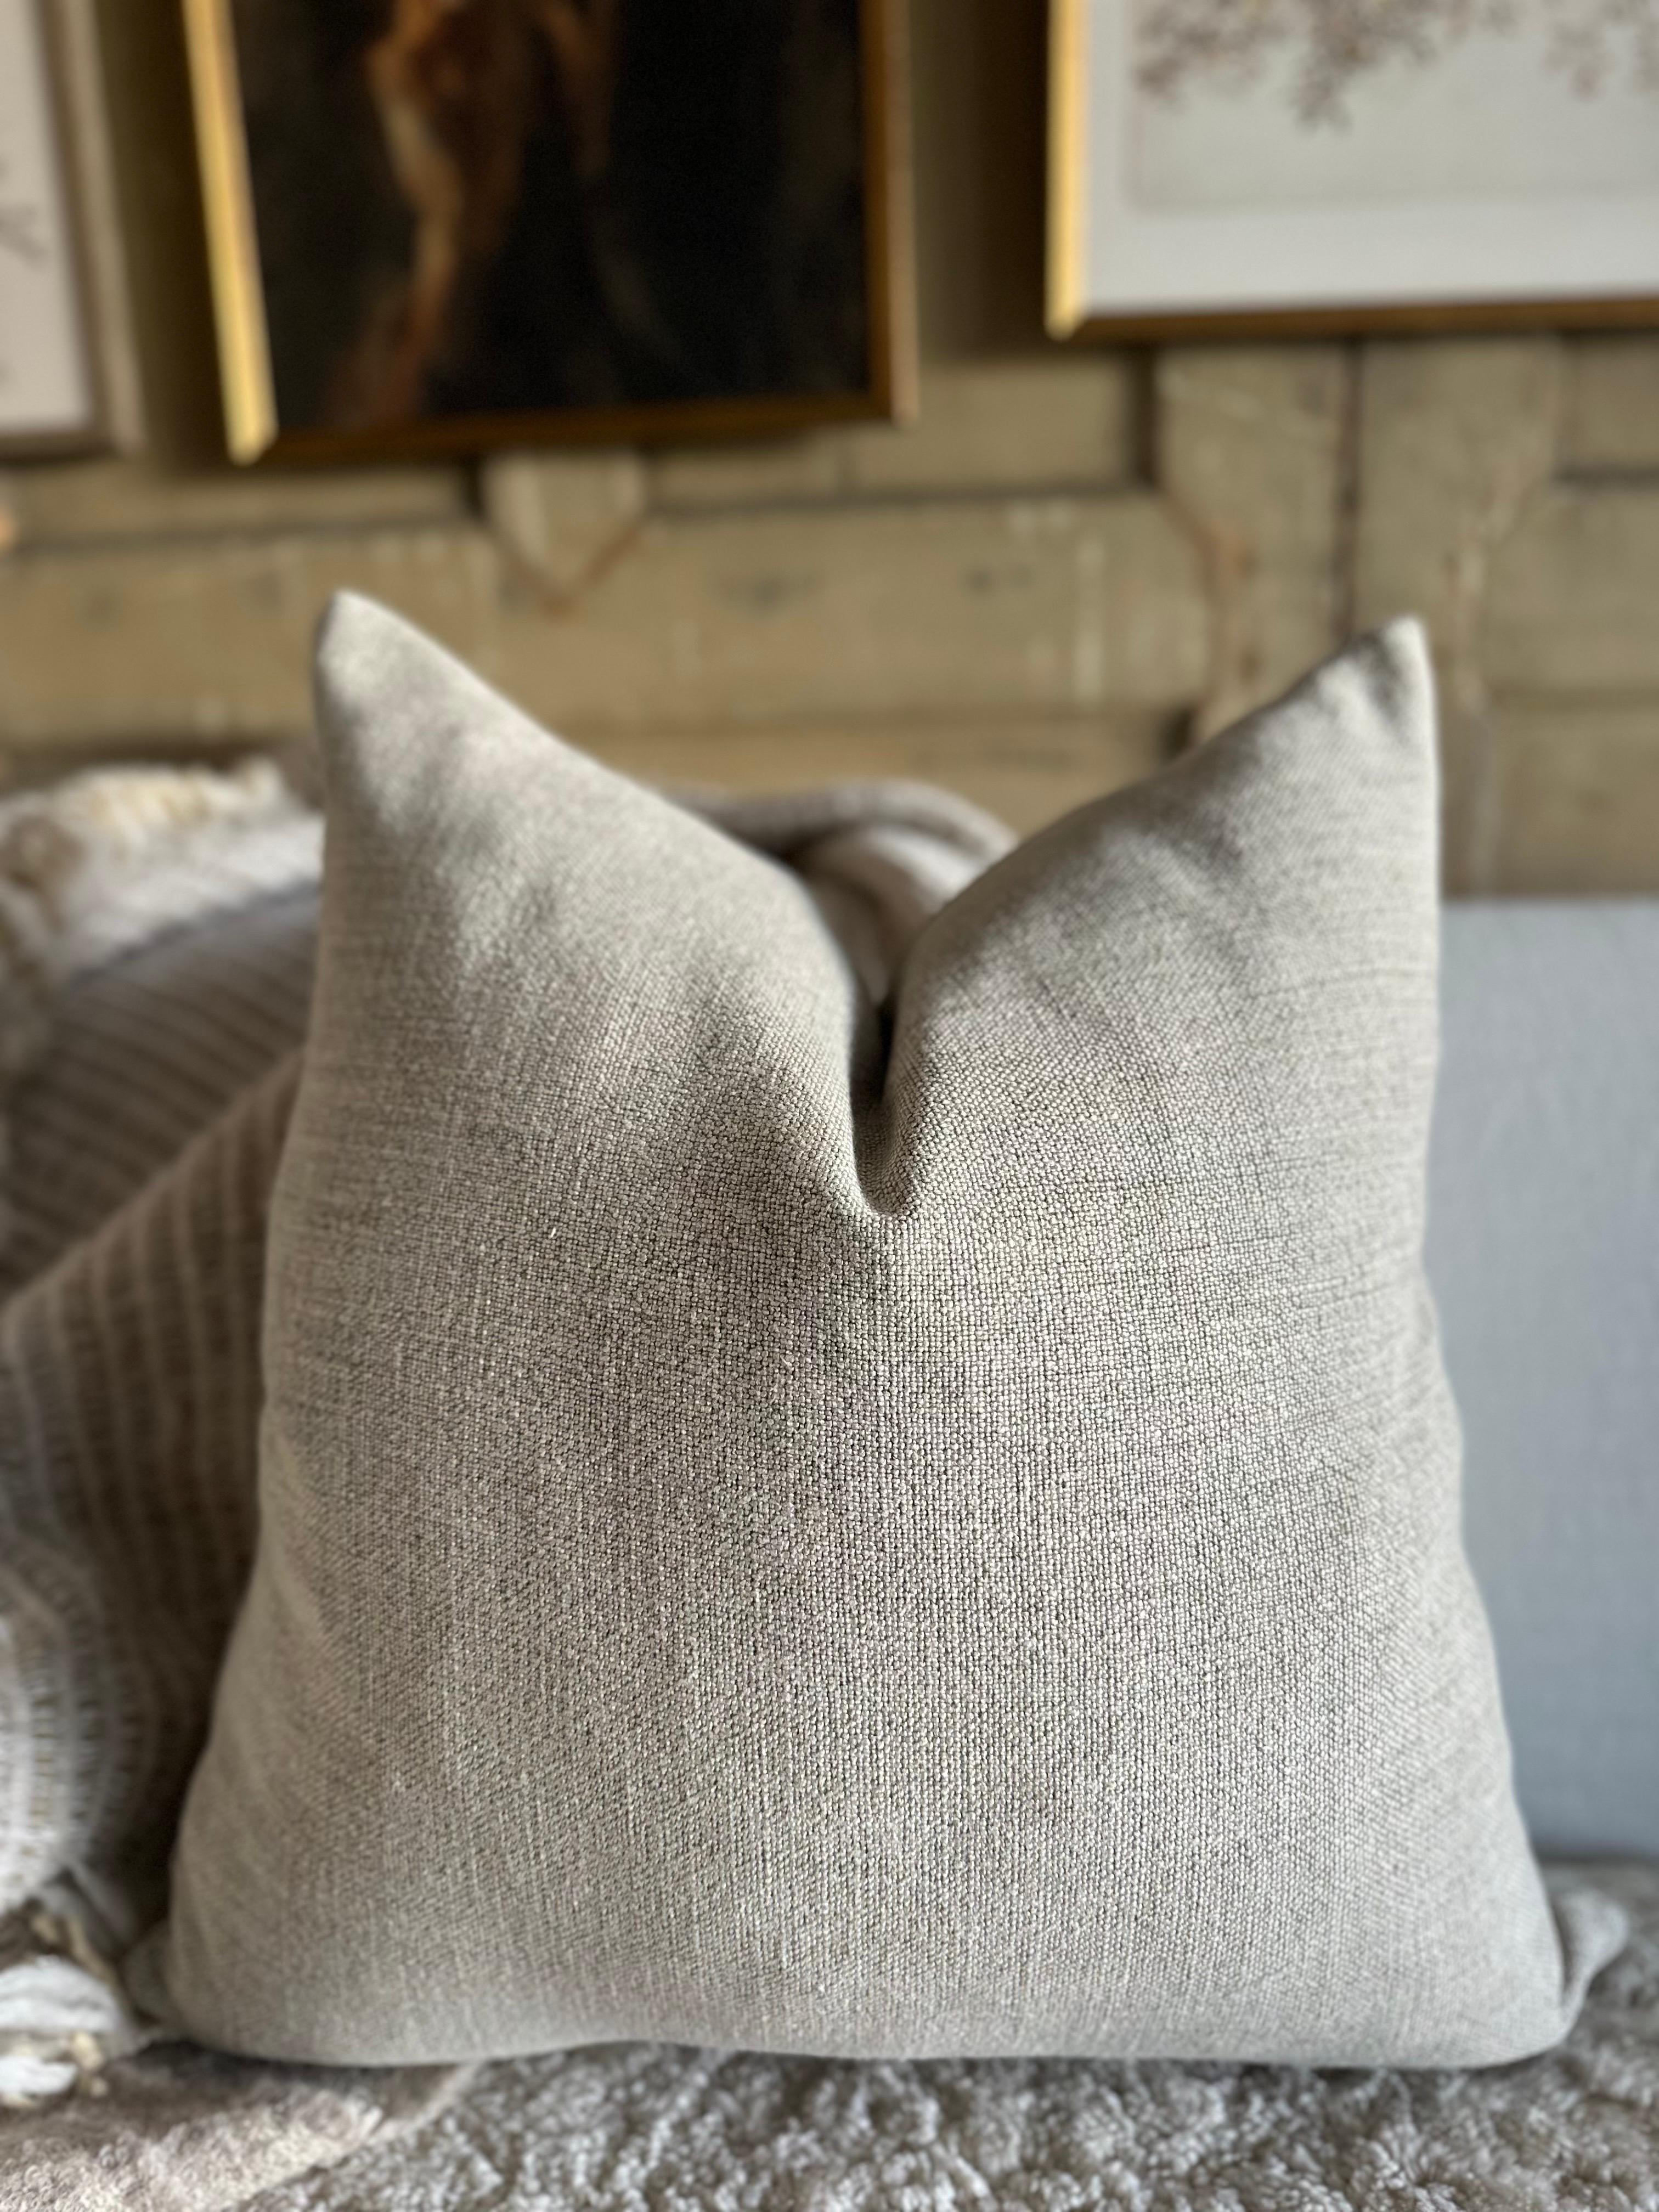 Linen Blend pillow in a natural color with a stone wash finish.
Antique Brass Zipper closure
Overlocked seams.
Includes Down Feather Insert
Color: Natural / Flax
Size: 22x22
51,000 Double Rubs
Extremely soft to the hand.
Care: Can be machine washed,